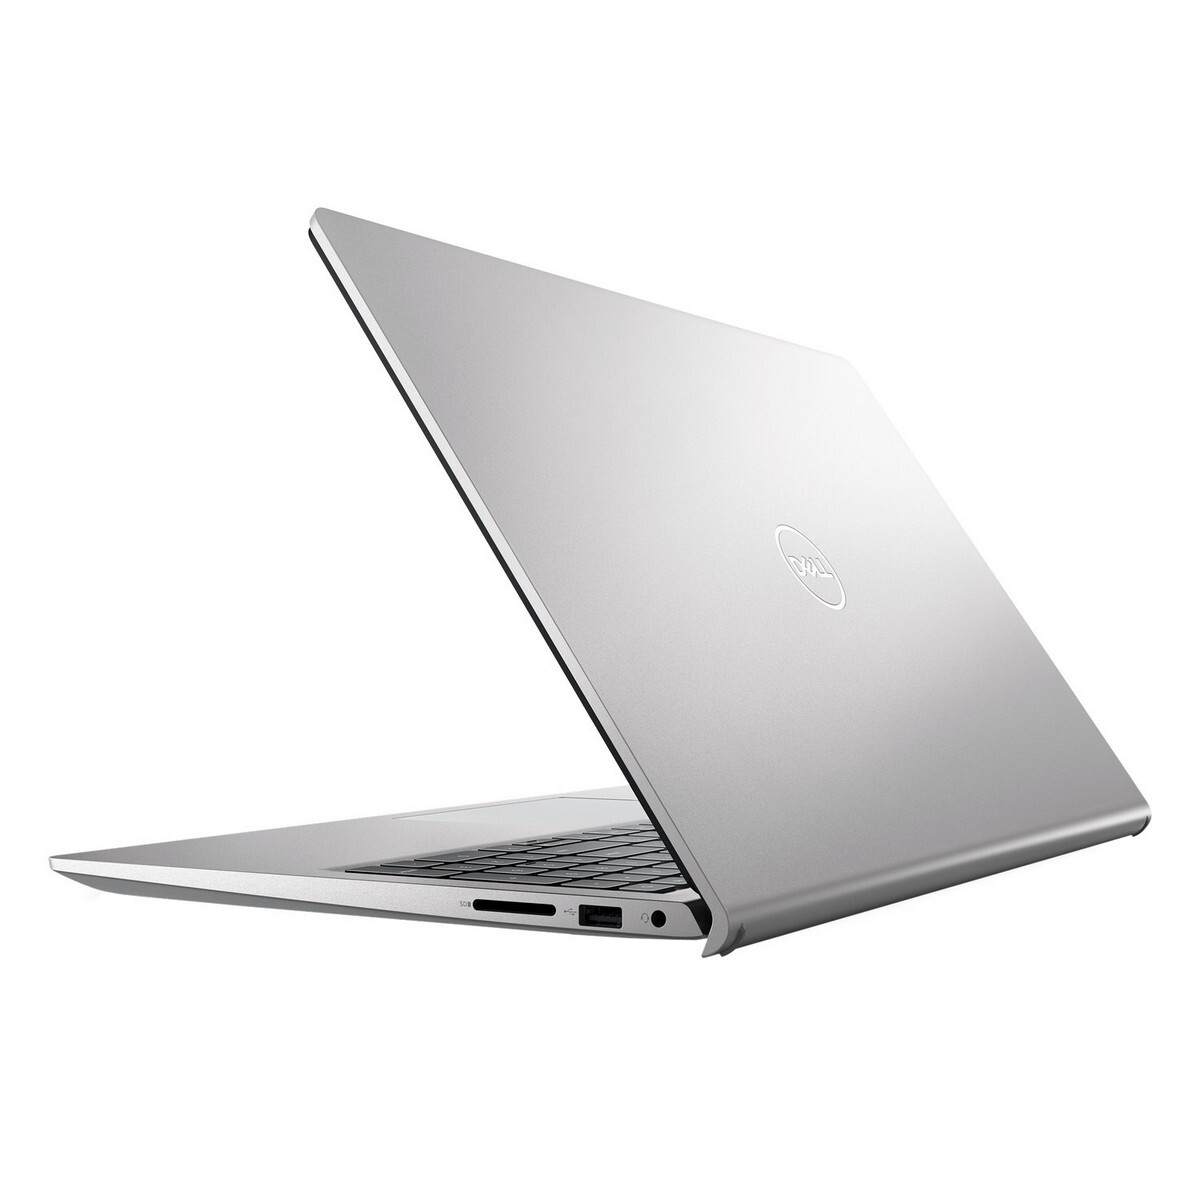 Dell Intel Core i3 11th Gen 1115G4 - (8 GB/512 GB SSD/Windows 11 Home) Inspiron 3520 Laptop  (15.6 Inch, Platinum Silver, 1.83 Kg, With MS Office)